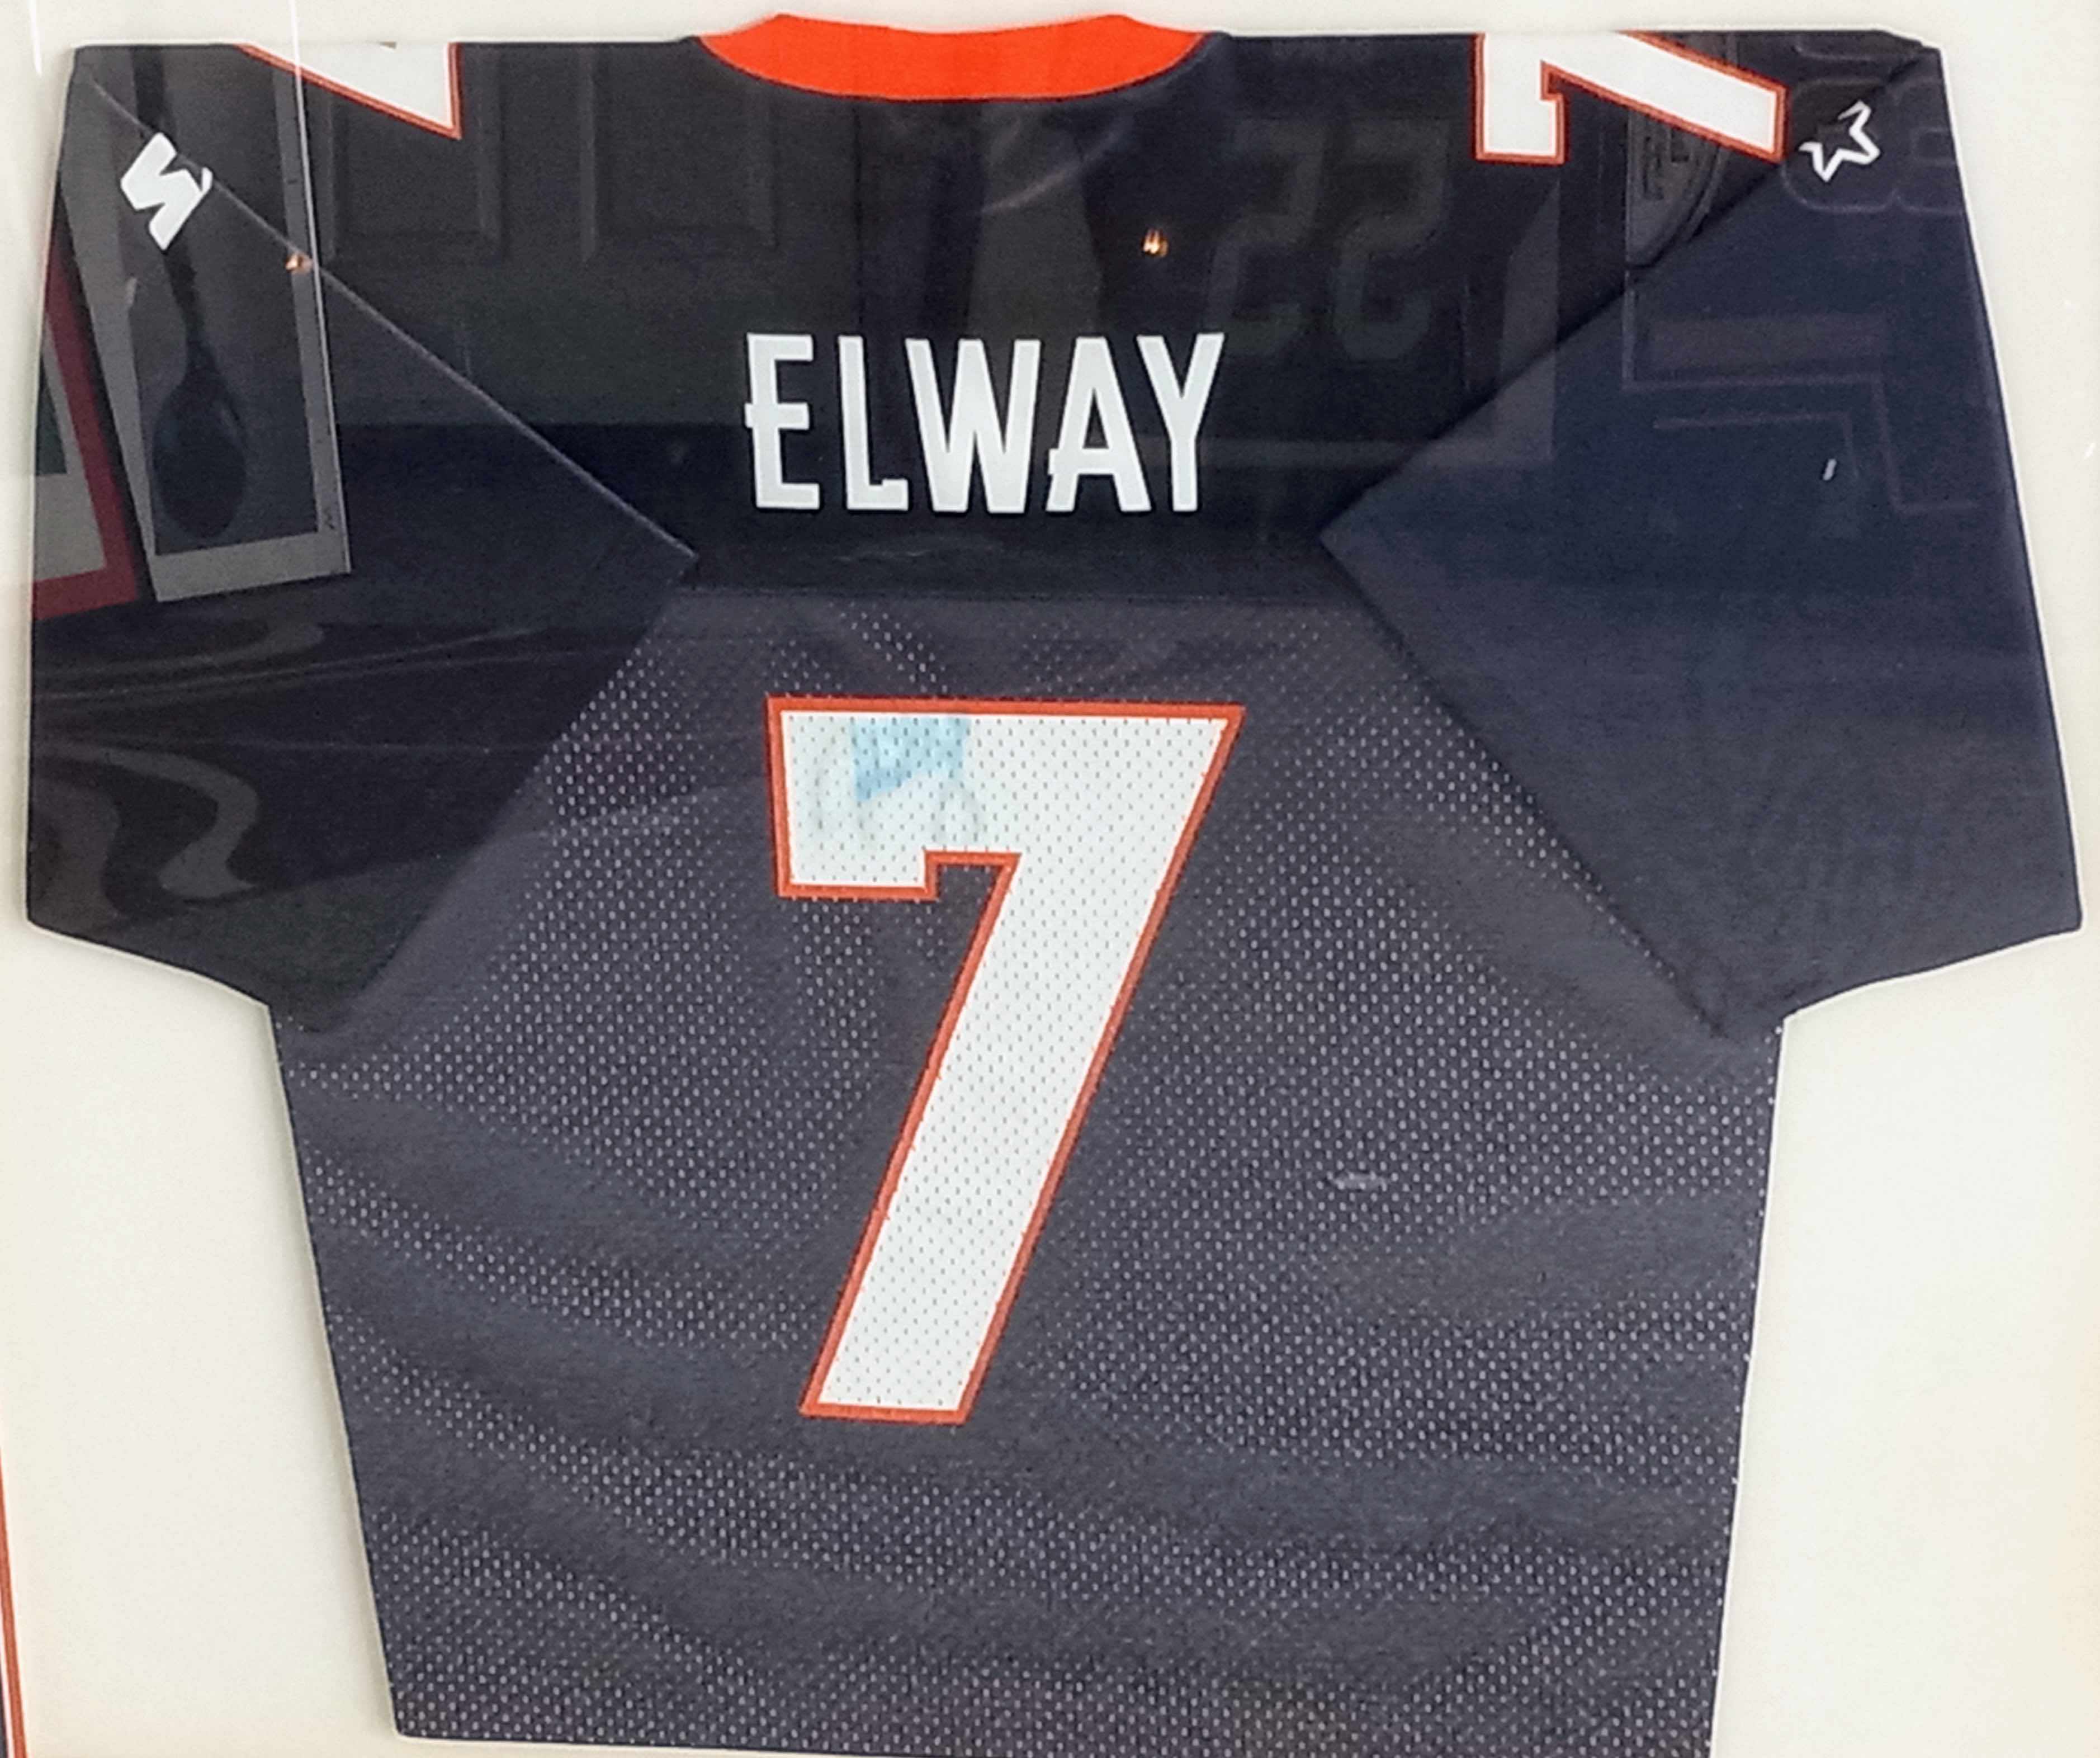 Photo 2 of JOHN ELWAY BRONCOS #7 FRAMED JERSEY AUTOGRAPHED BY JOHN ELWAY 42” X 35.5”